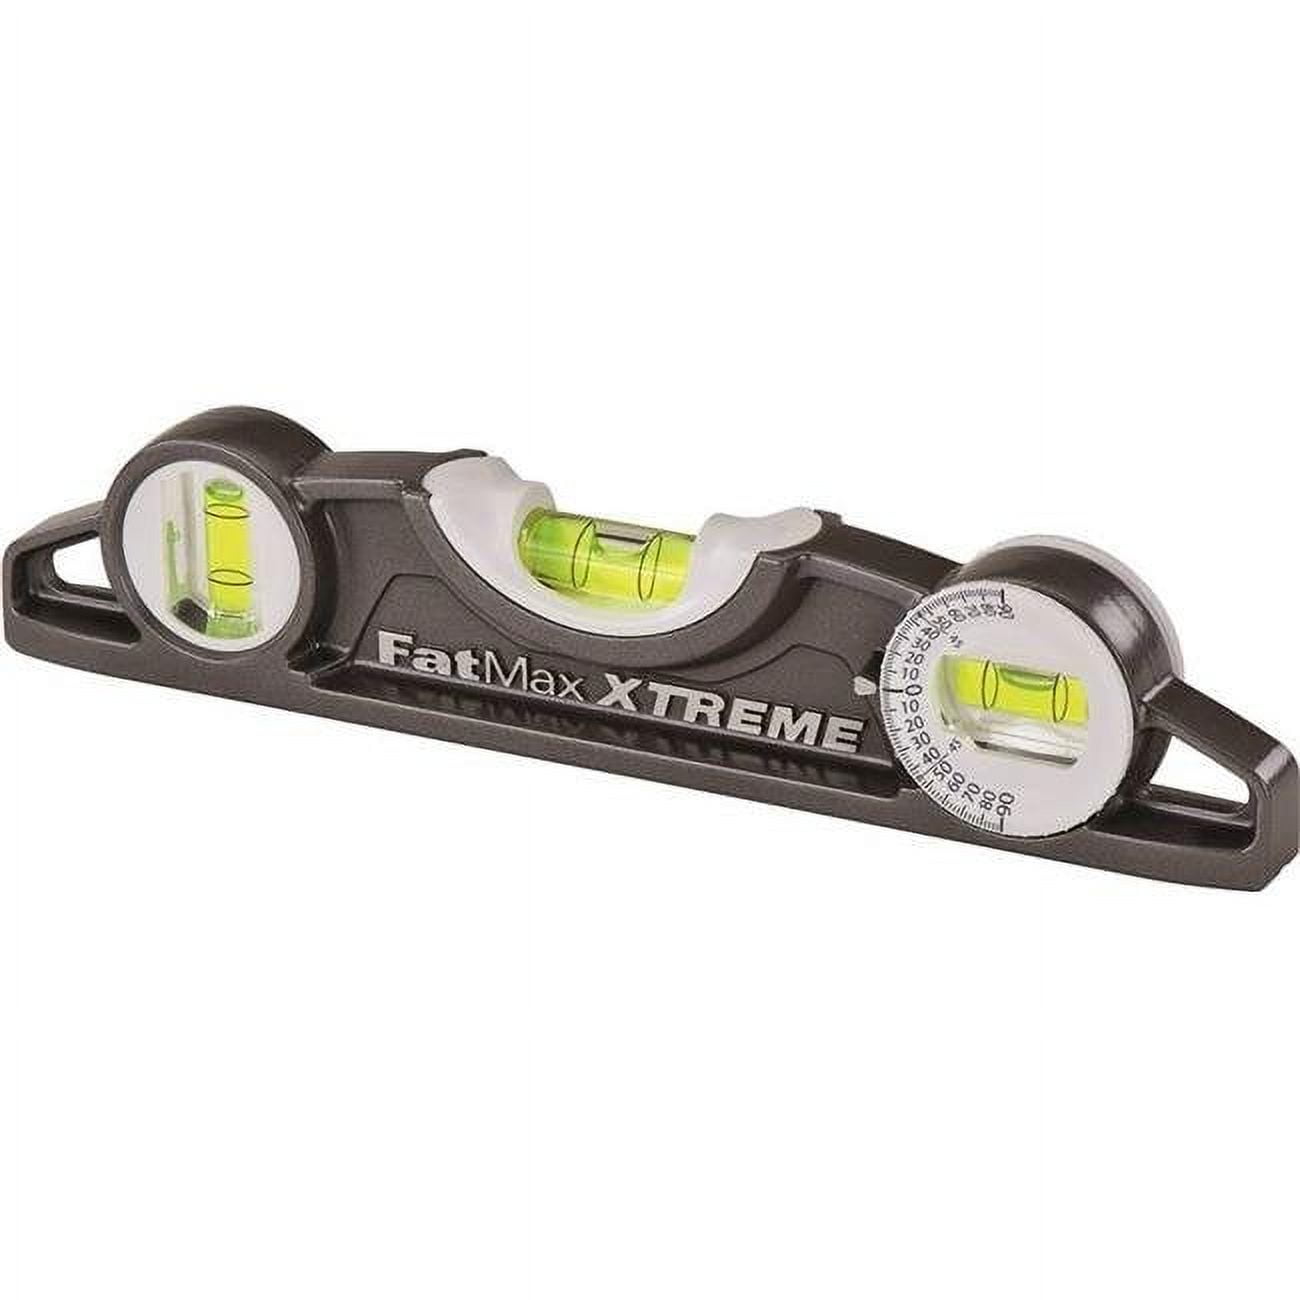 Stanley Tools 2663581 Fatmax Xtreme 43-609 Magnetic Torpedo Level, 0.0005  in 9 in. - Aluminum